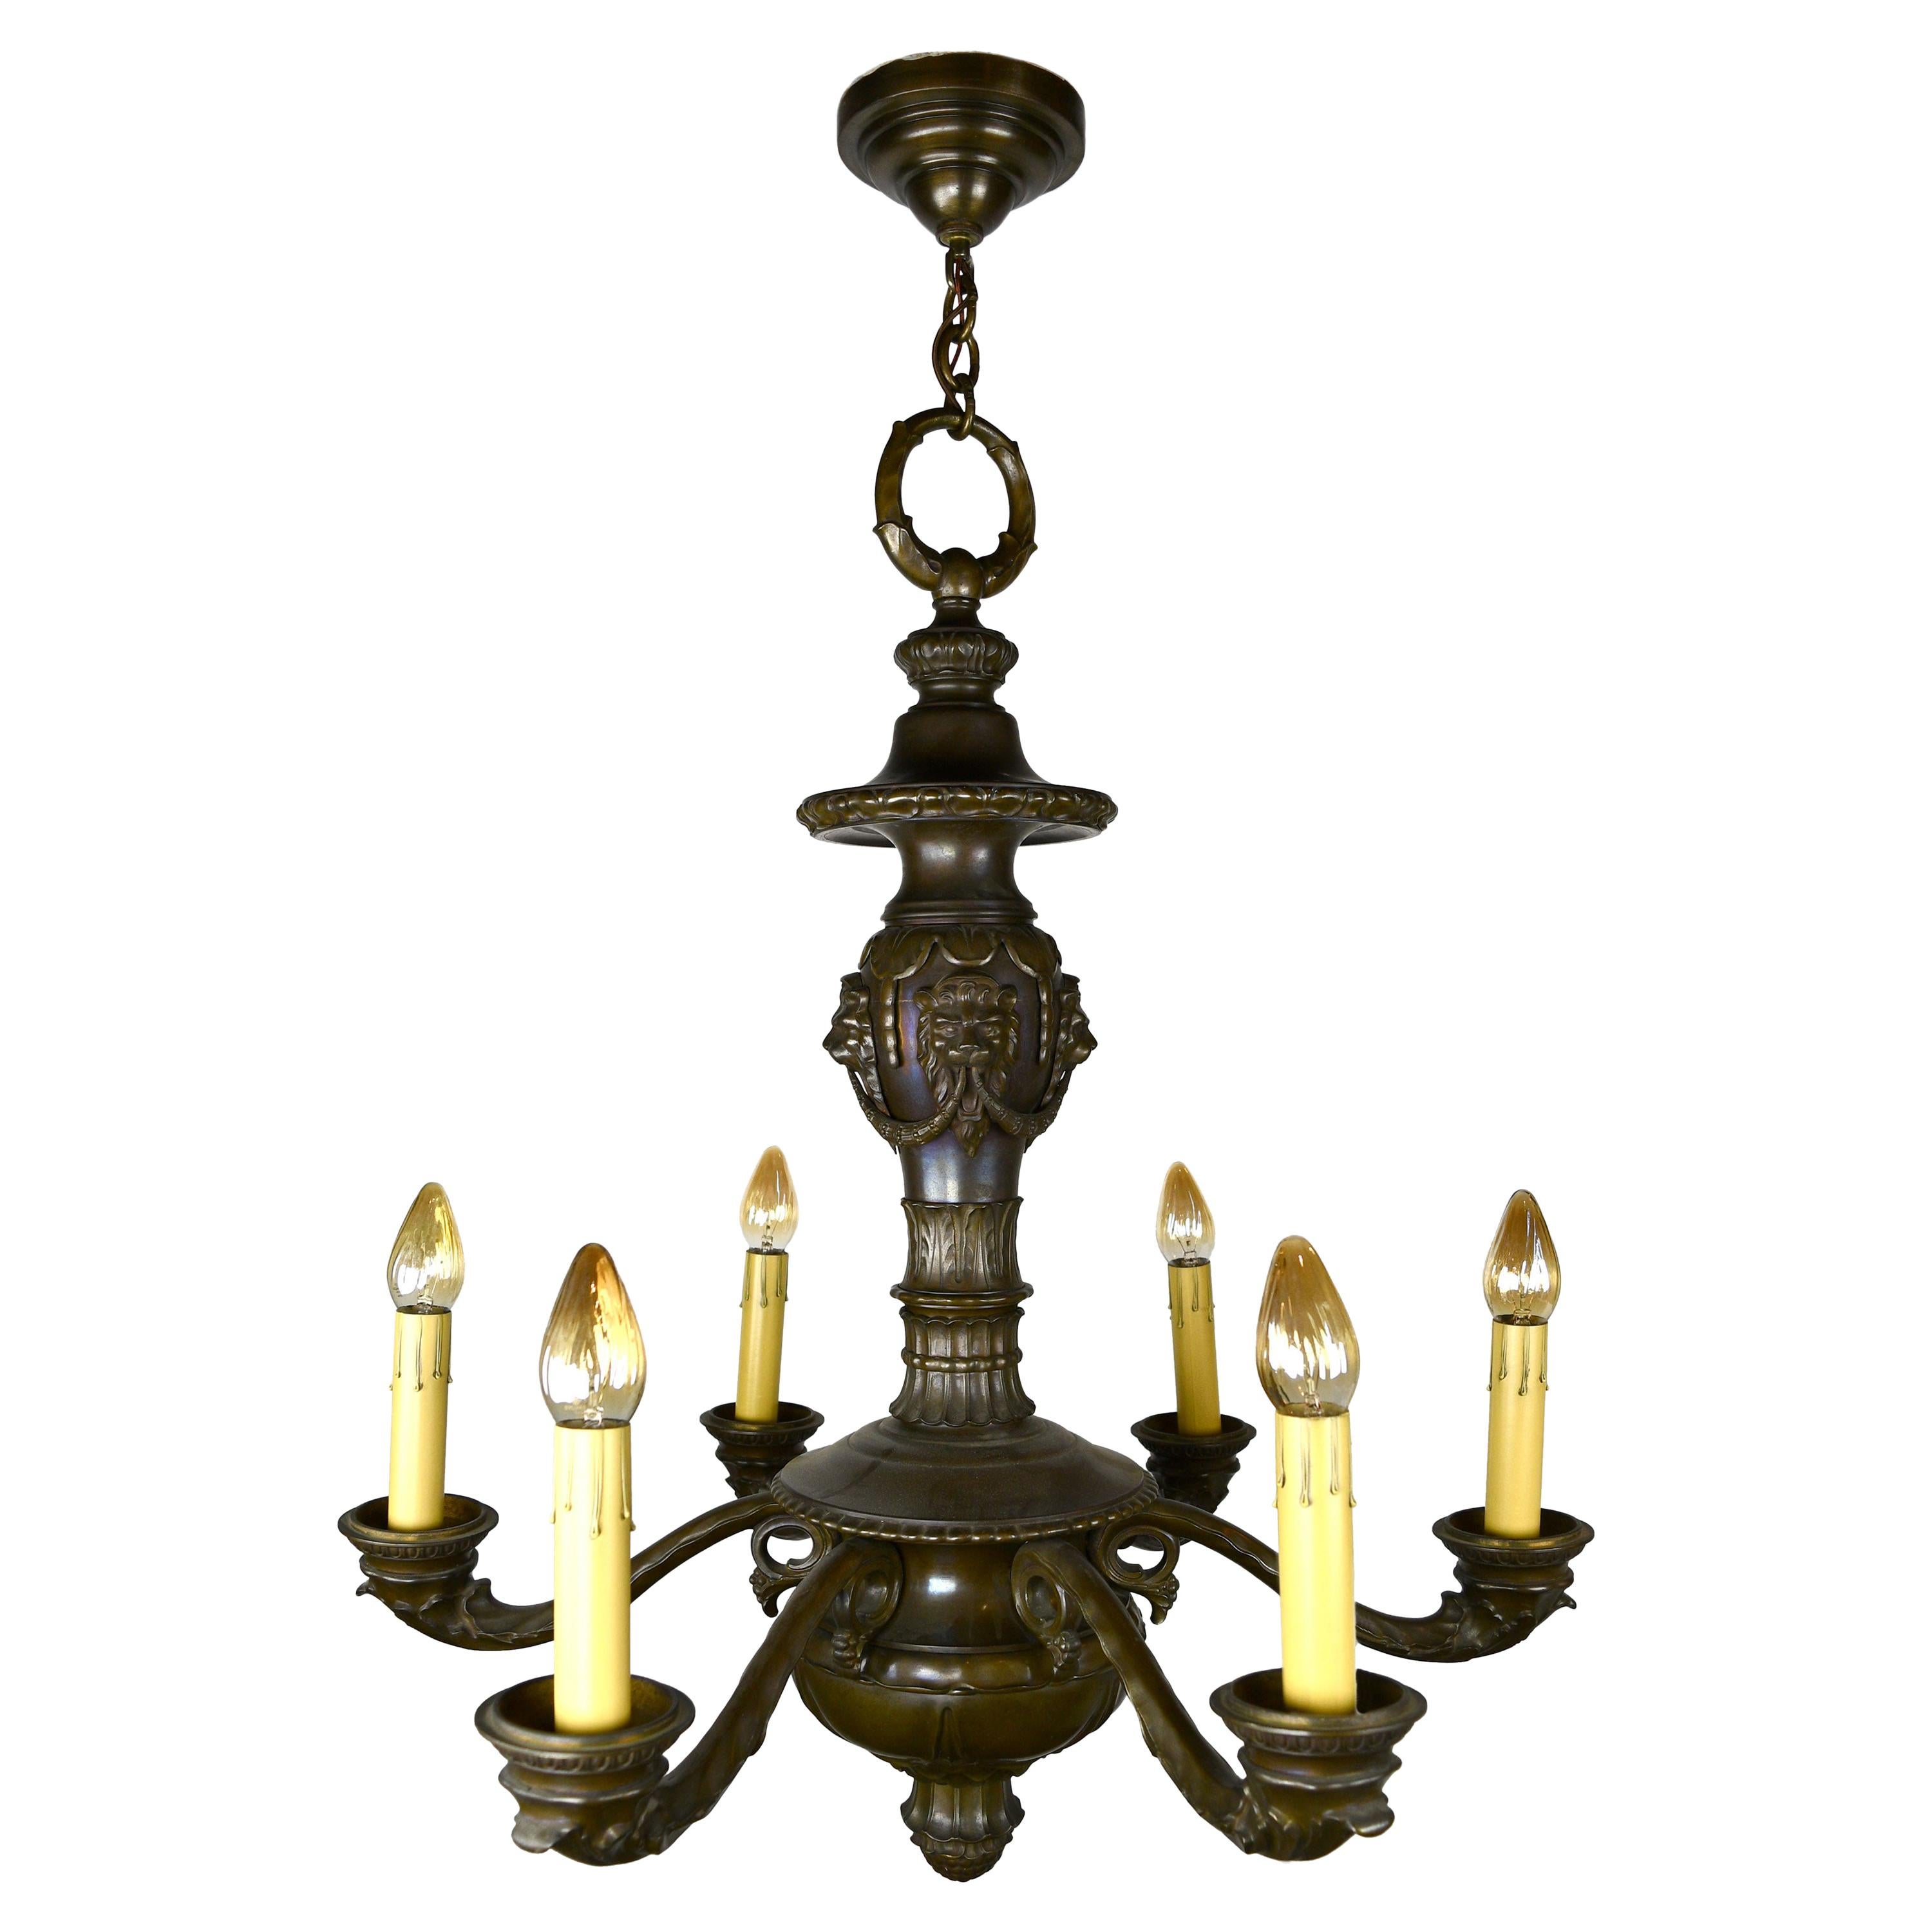 Brass 6-Light Chandelier with Lions